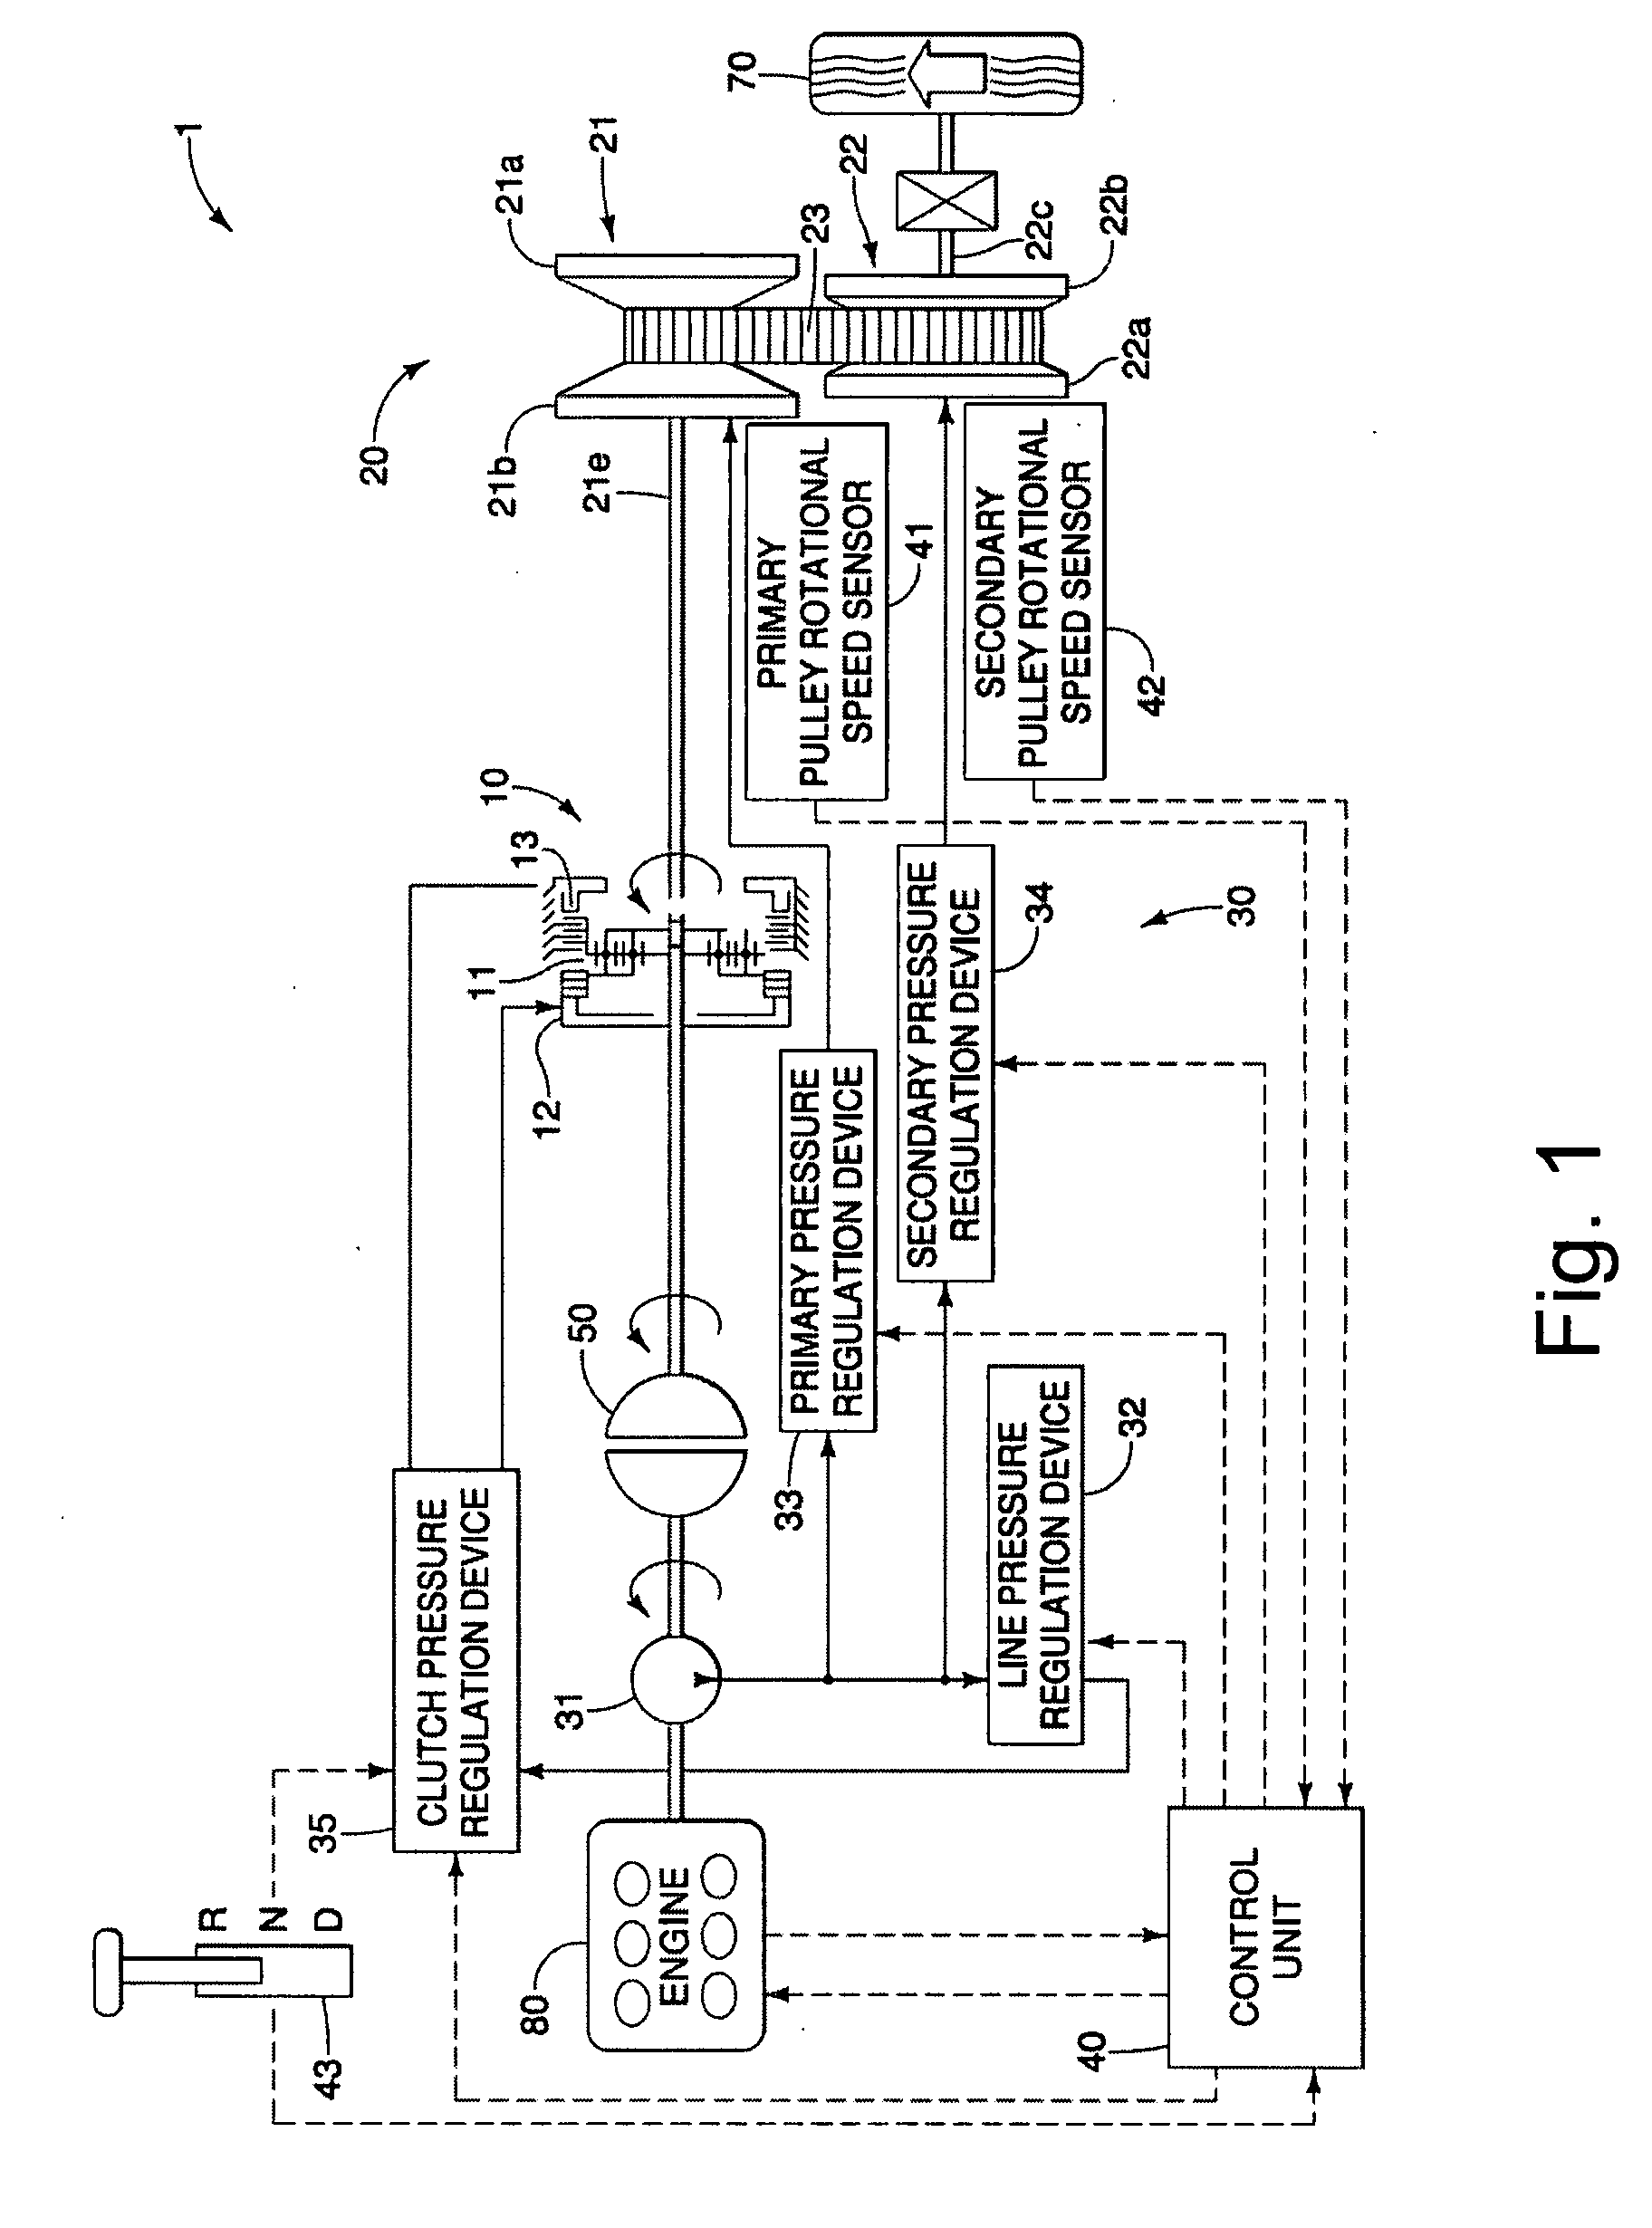 Torque control device for continuously variable transmission